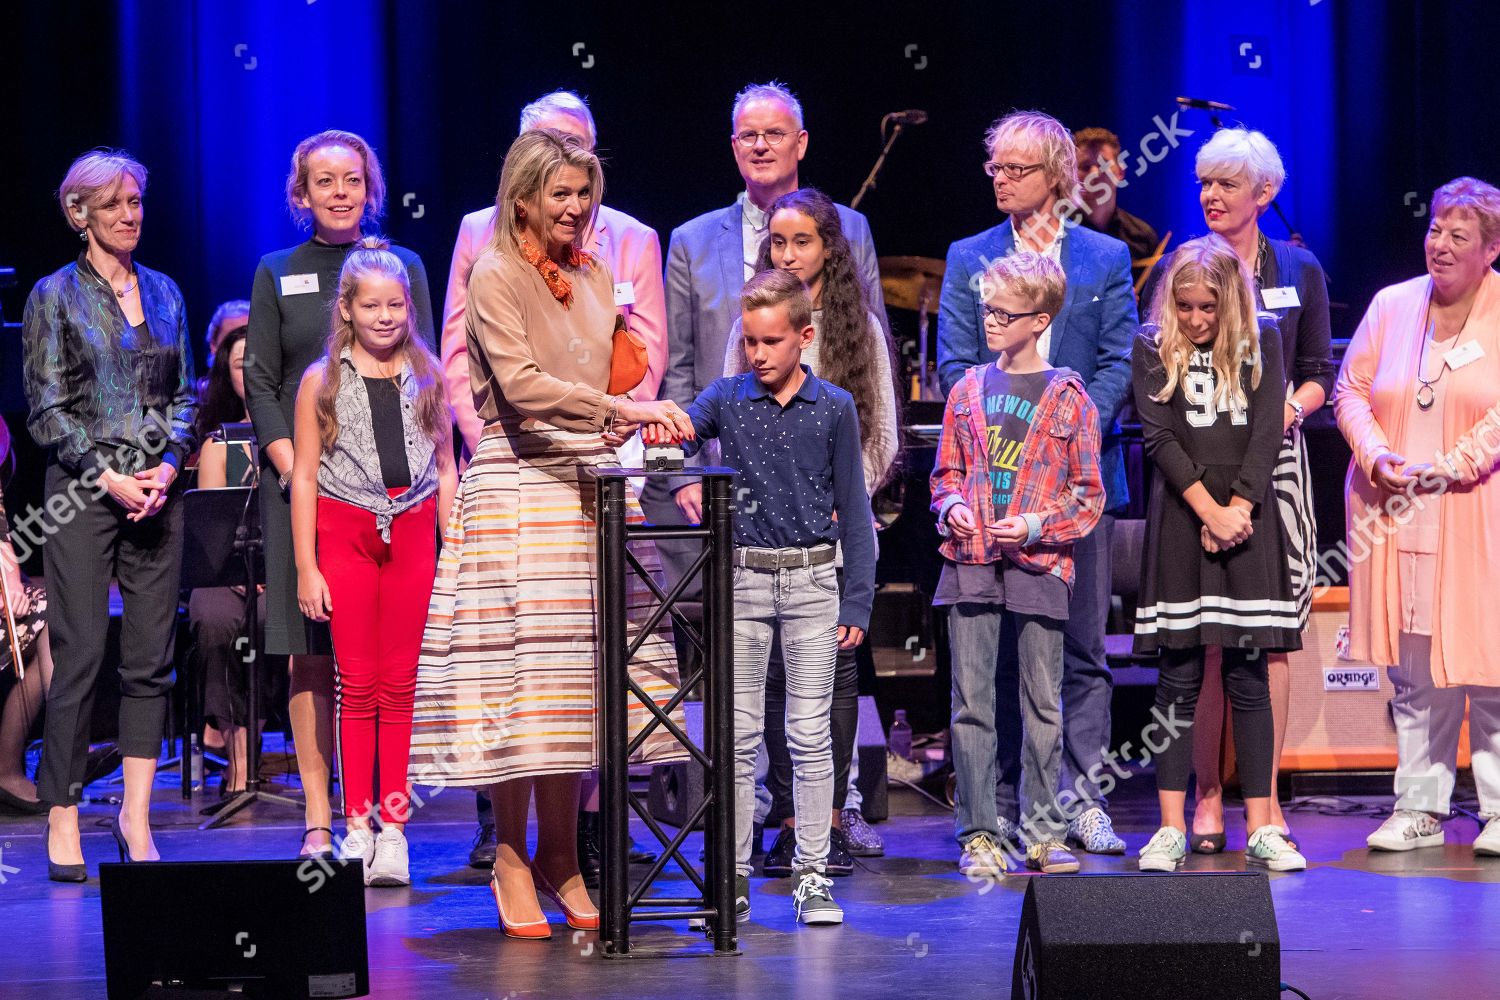 signing-of-the-cooperation-agreement-for-music-education-drachten-the-netherlands-shutterstock-editorial-9887703g.jpg